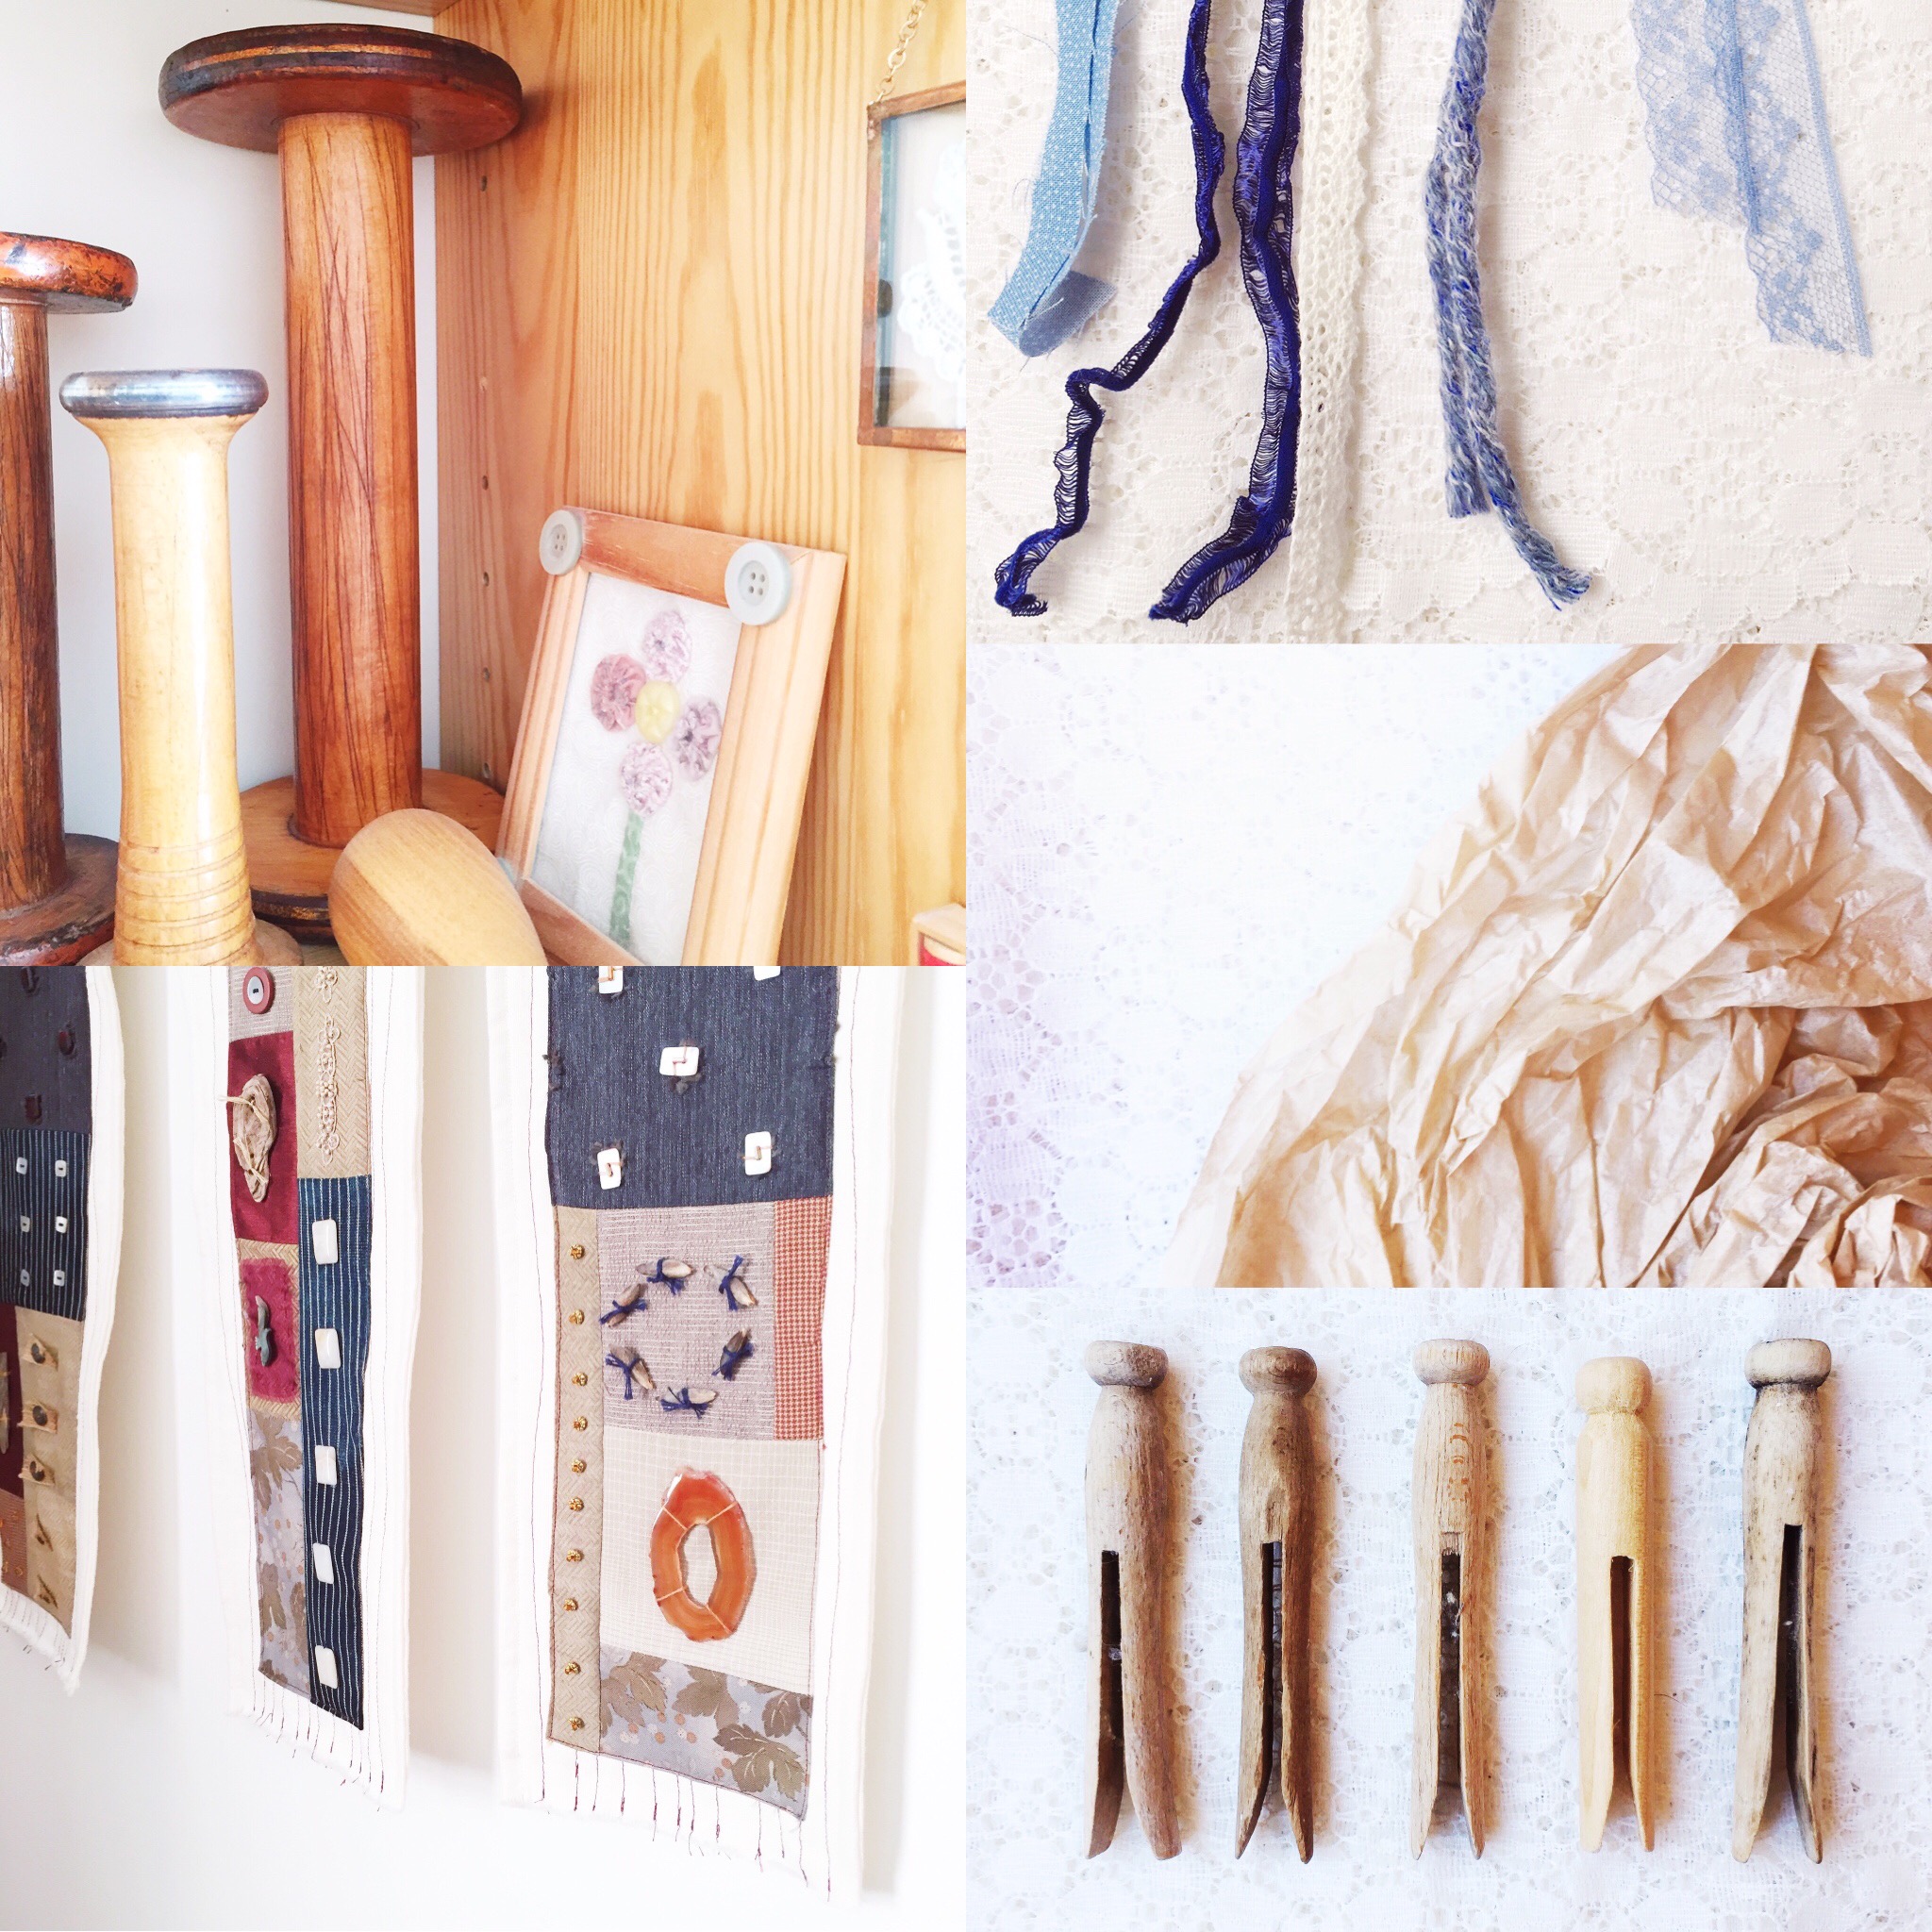 Weekly Color Inspiration: Repurposed - Old Things Find New Meaning 